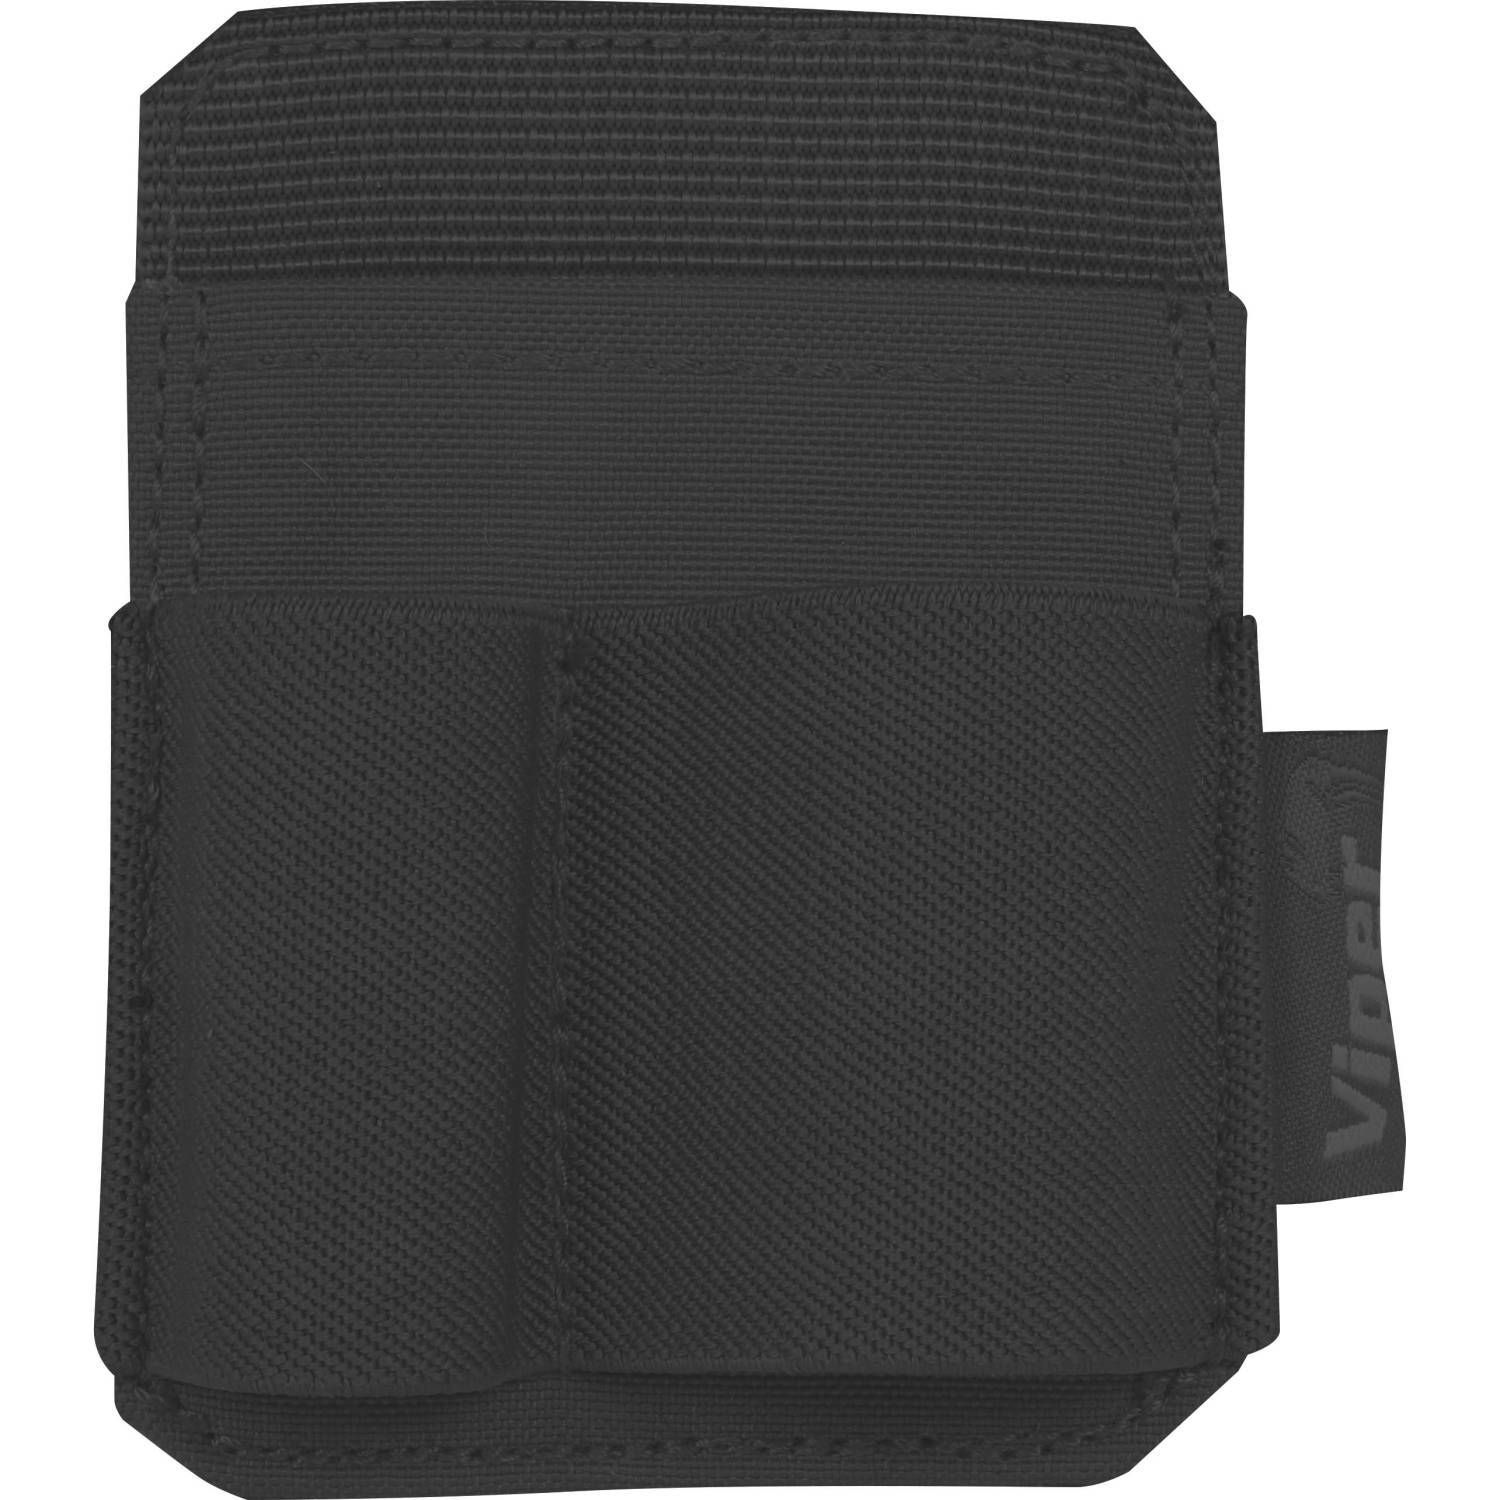 Viper Tactical Elasticated Accessory Holder Pouch Bag Patch Torch Pens Tools UK 